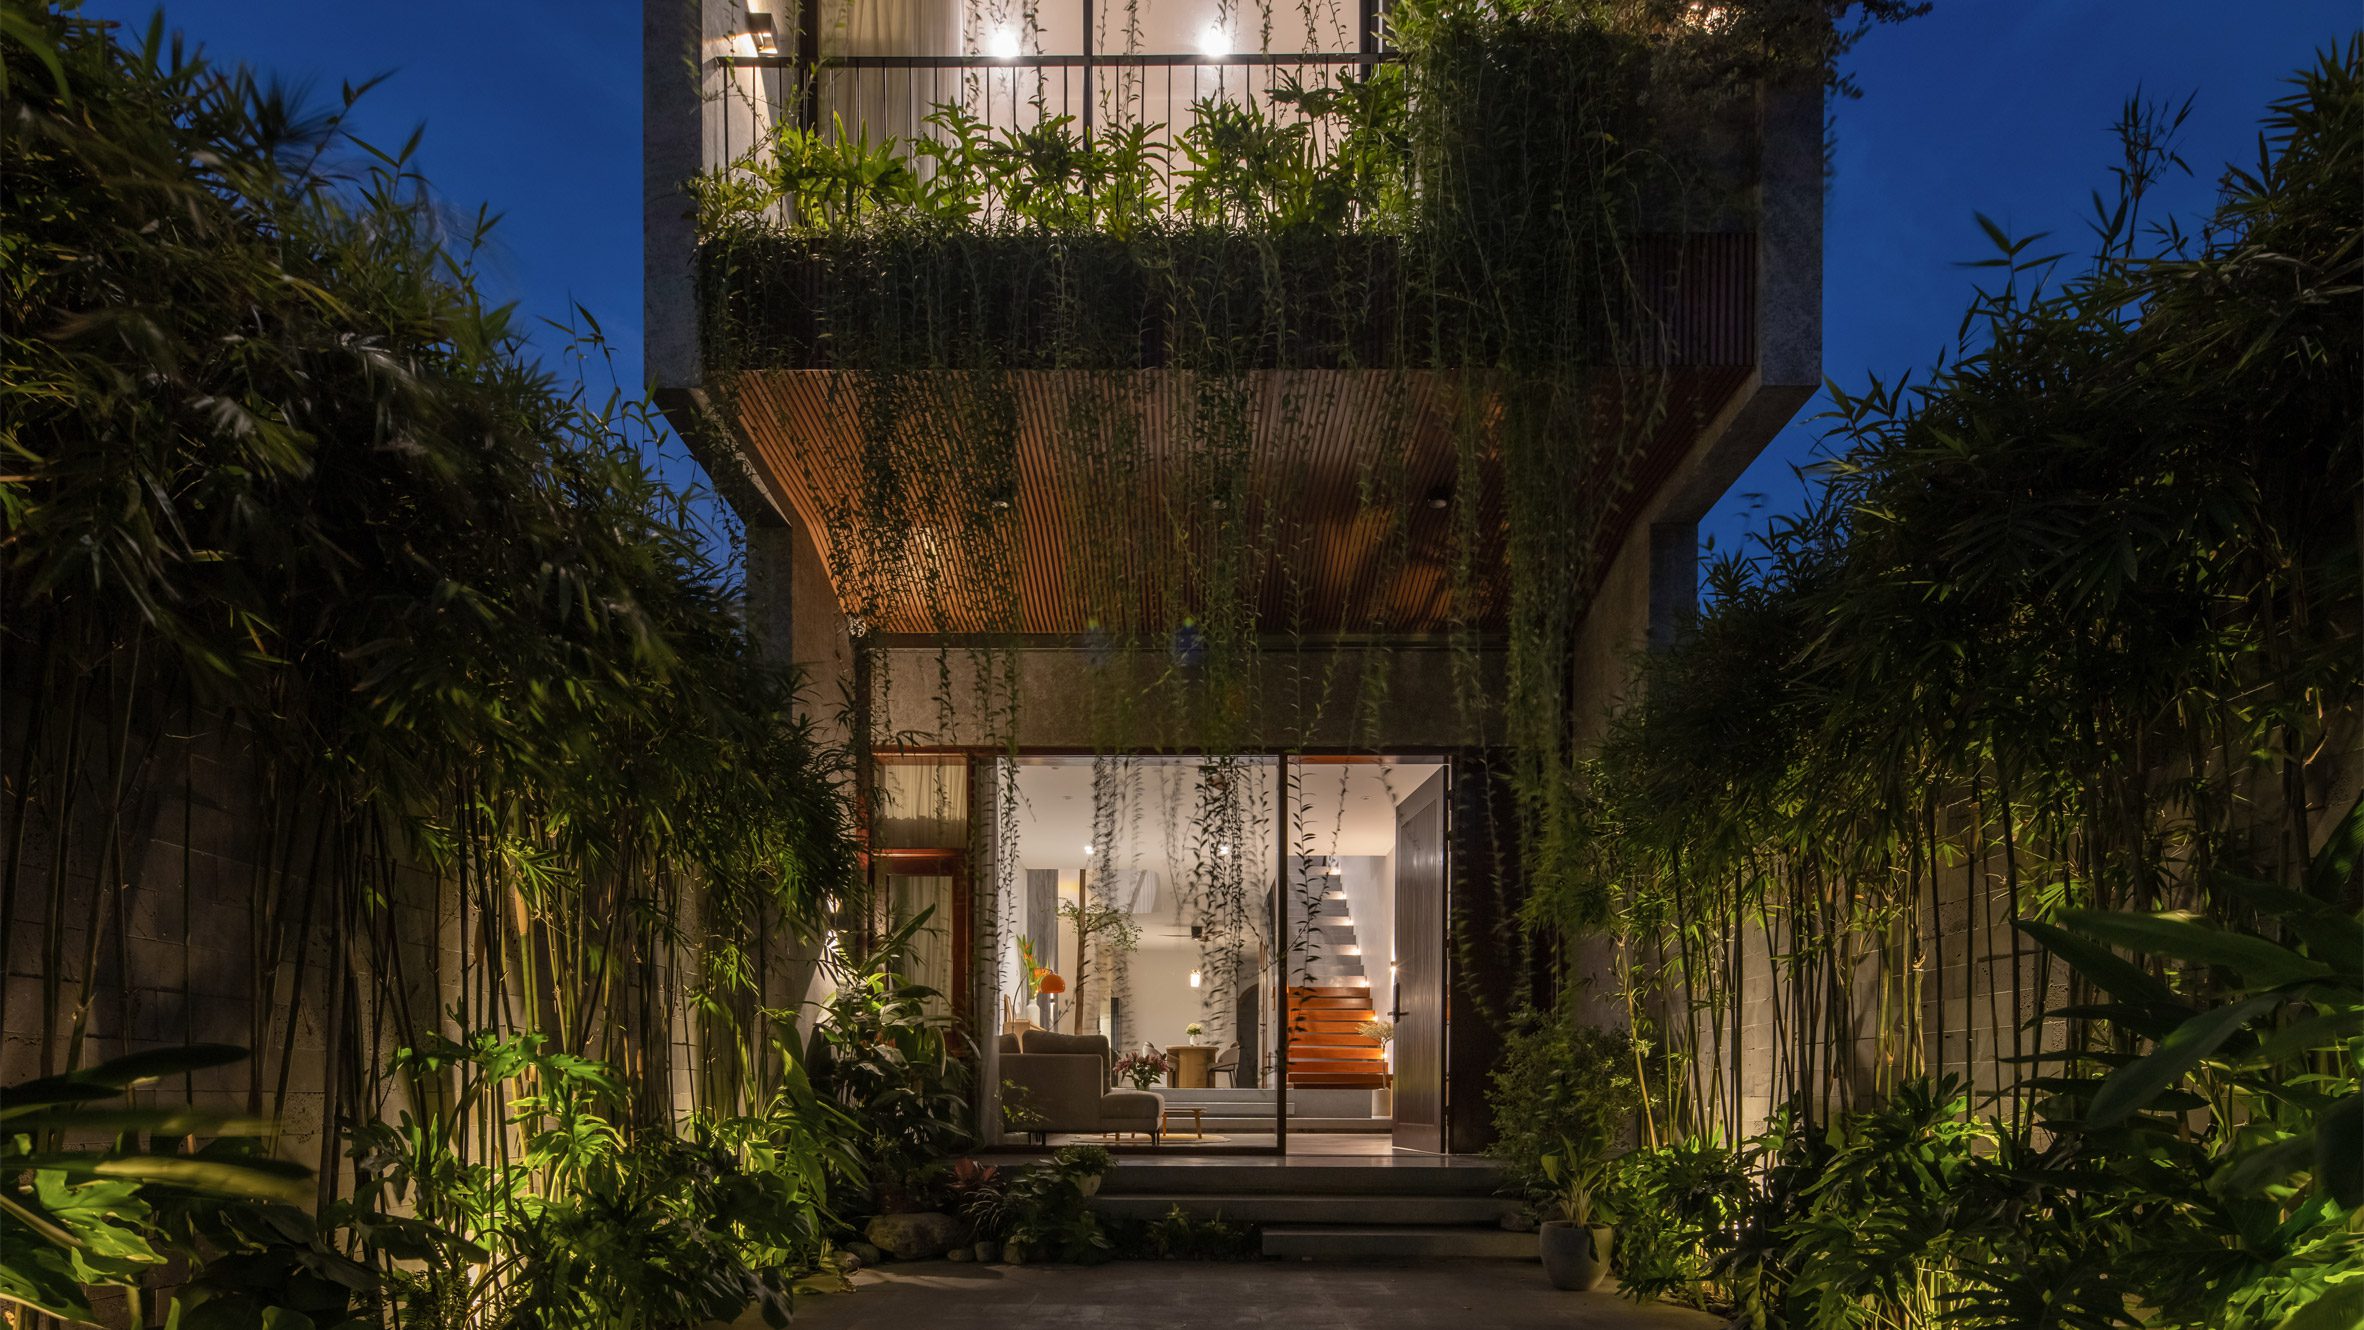 Exterior and garden at night in De Chill House in Vietnam by X11